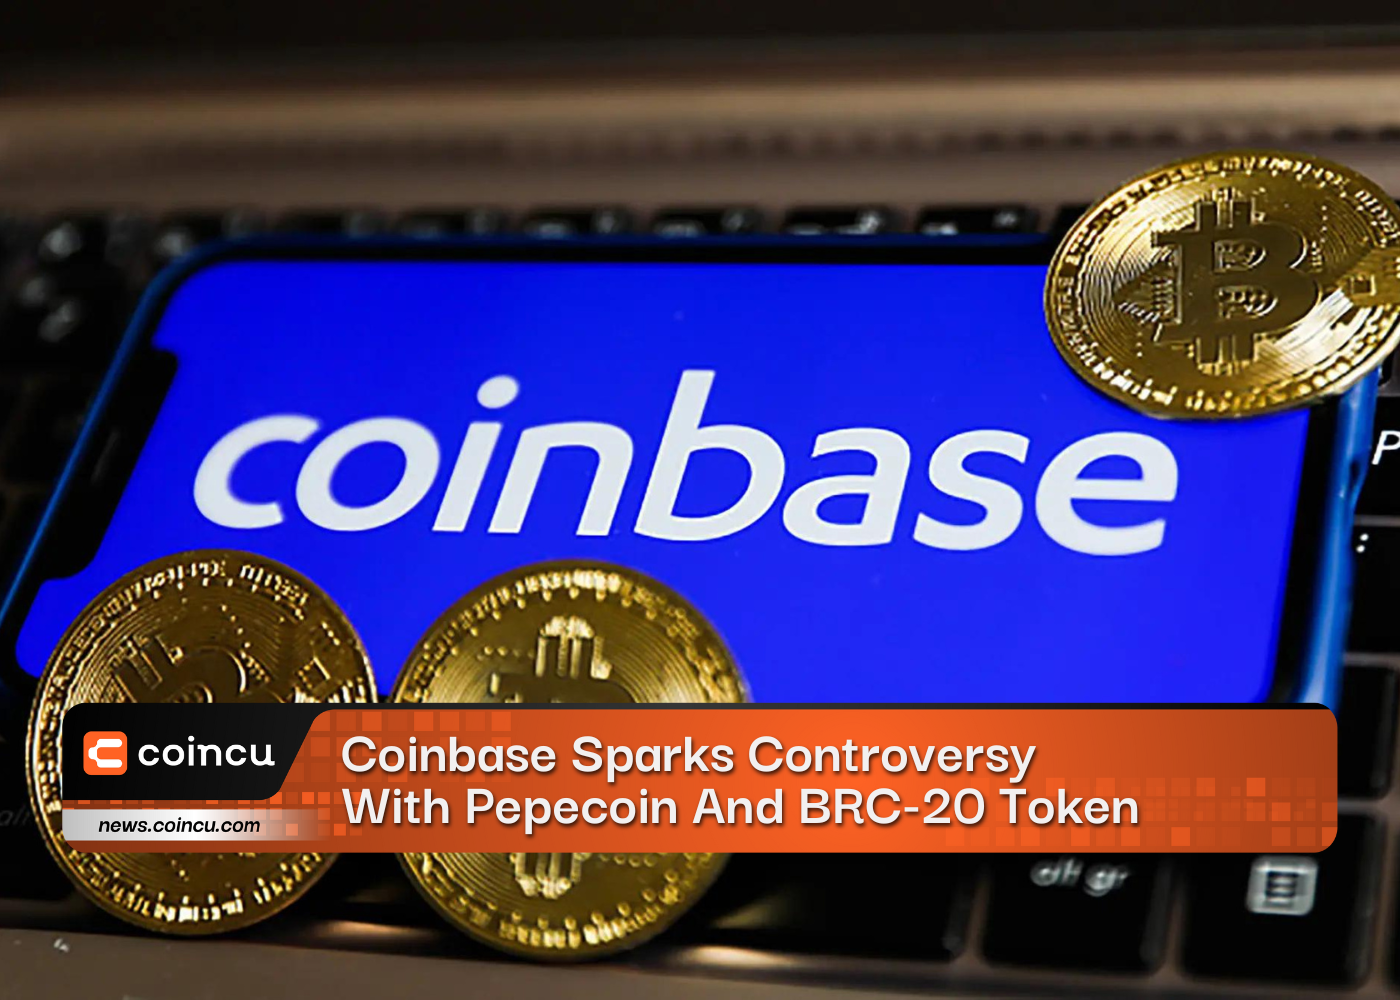 Coinbase Sparks Controversy With Pepecoin